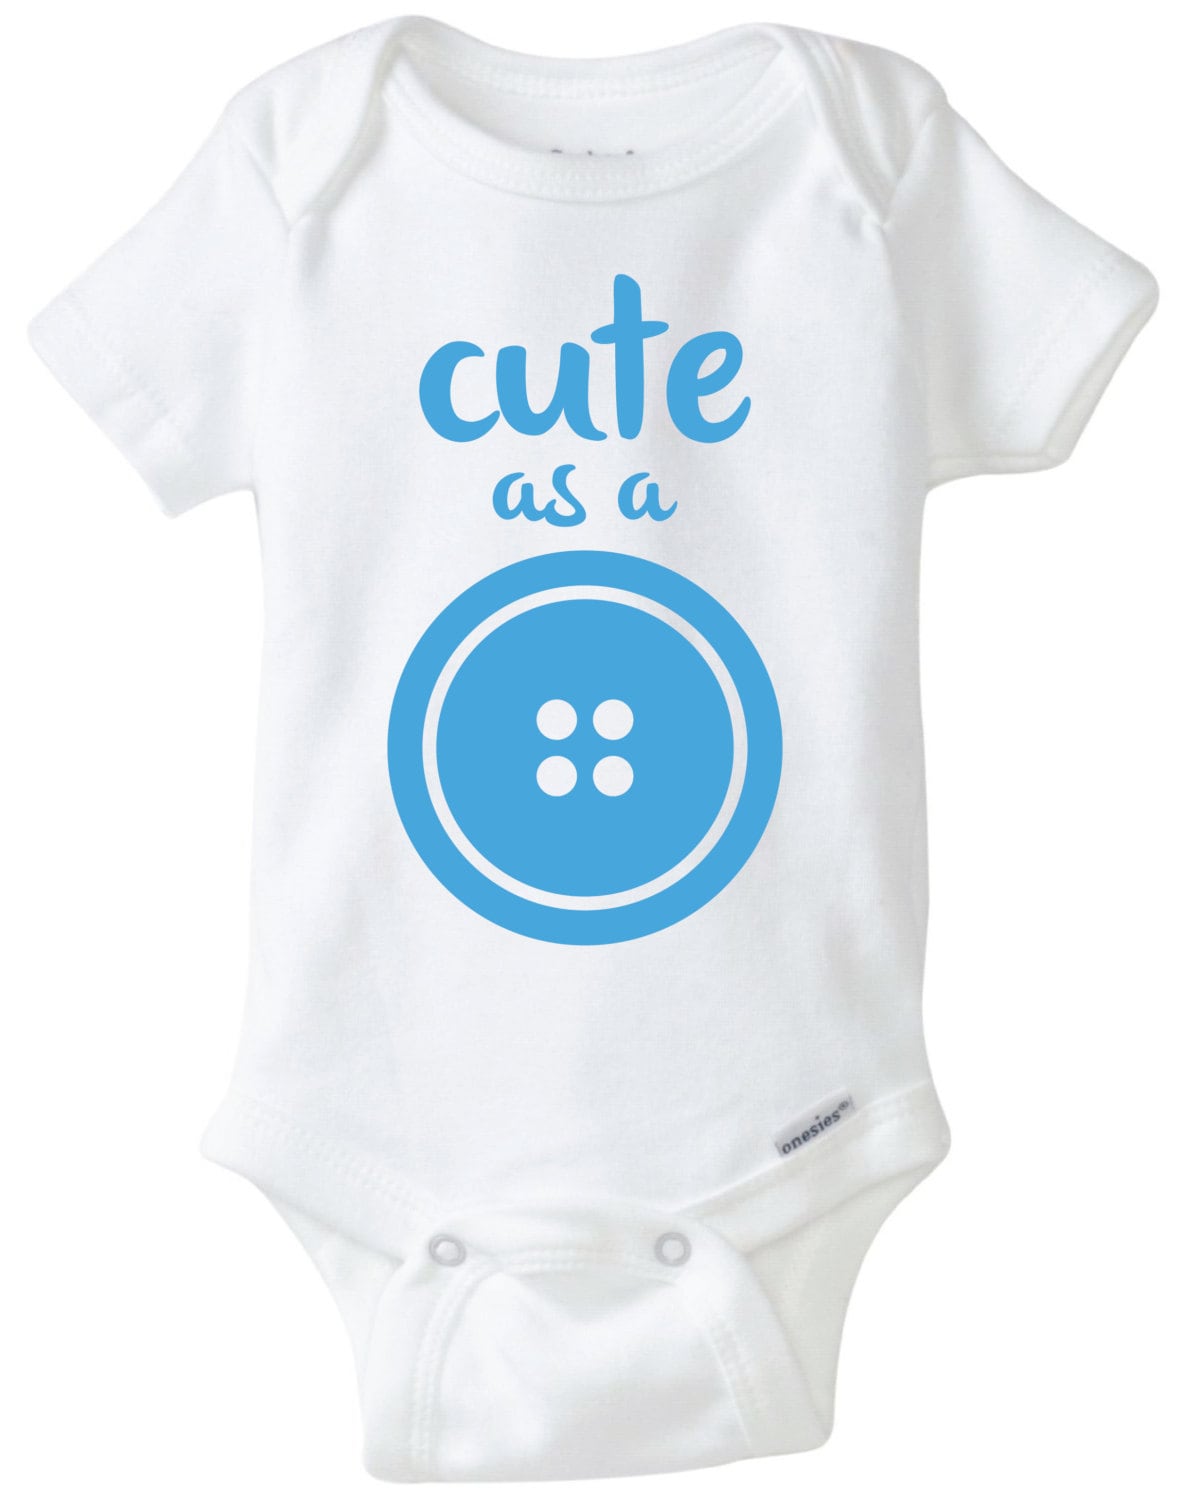 Download Cute as a Button Baby Onesie Design, SVG, DXF, EPS Vector ...